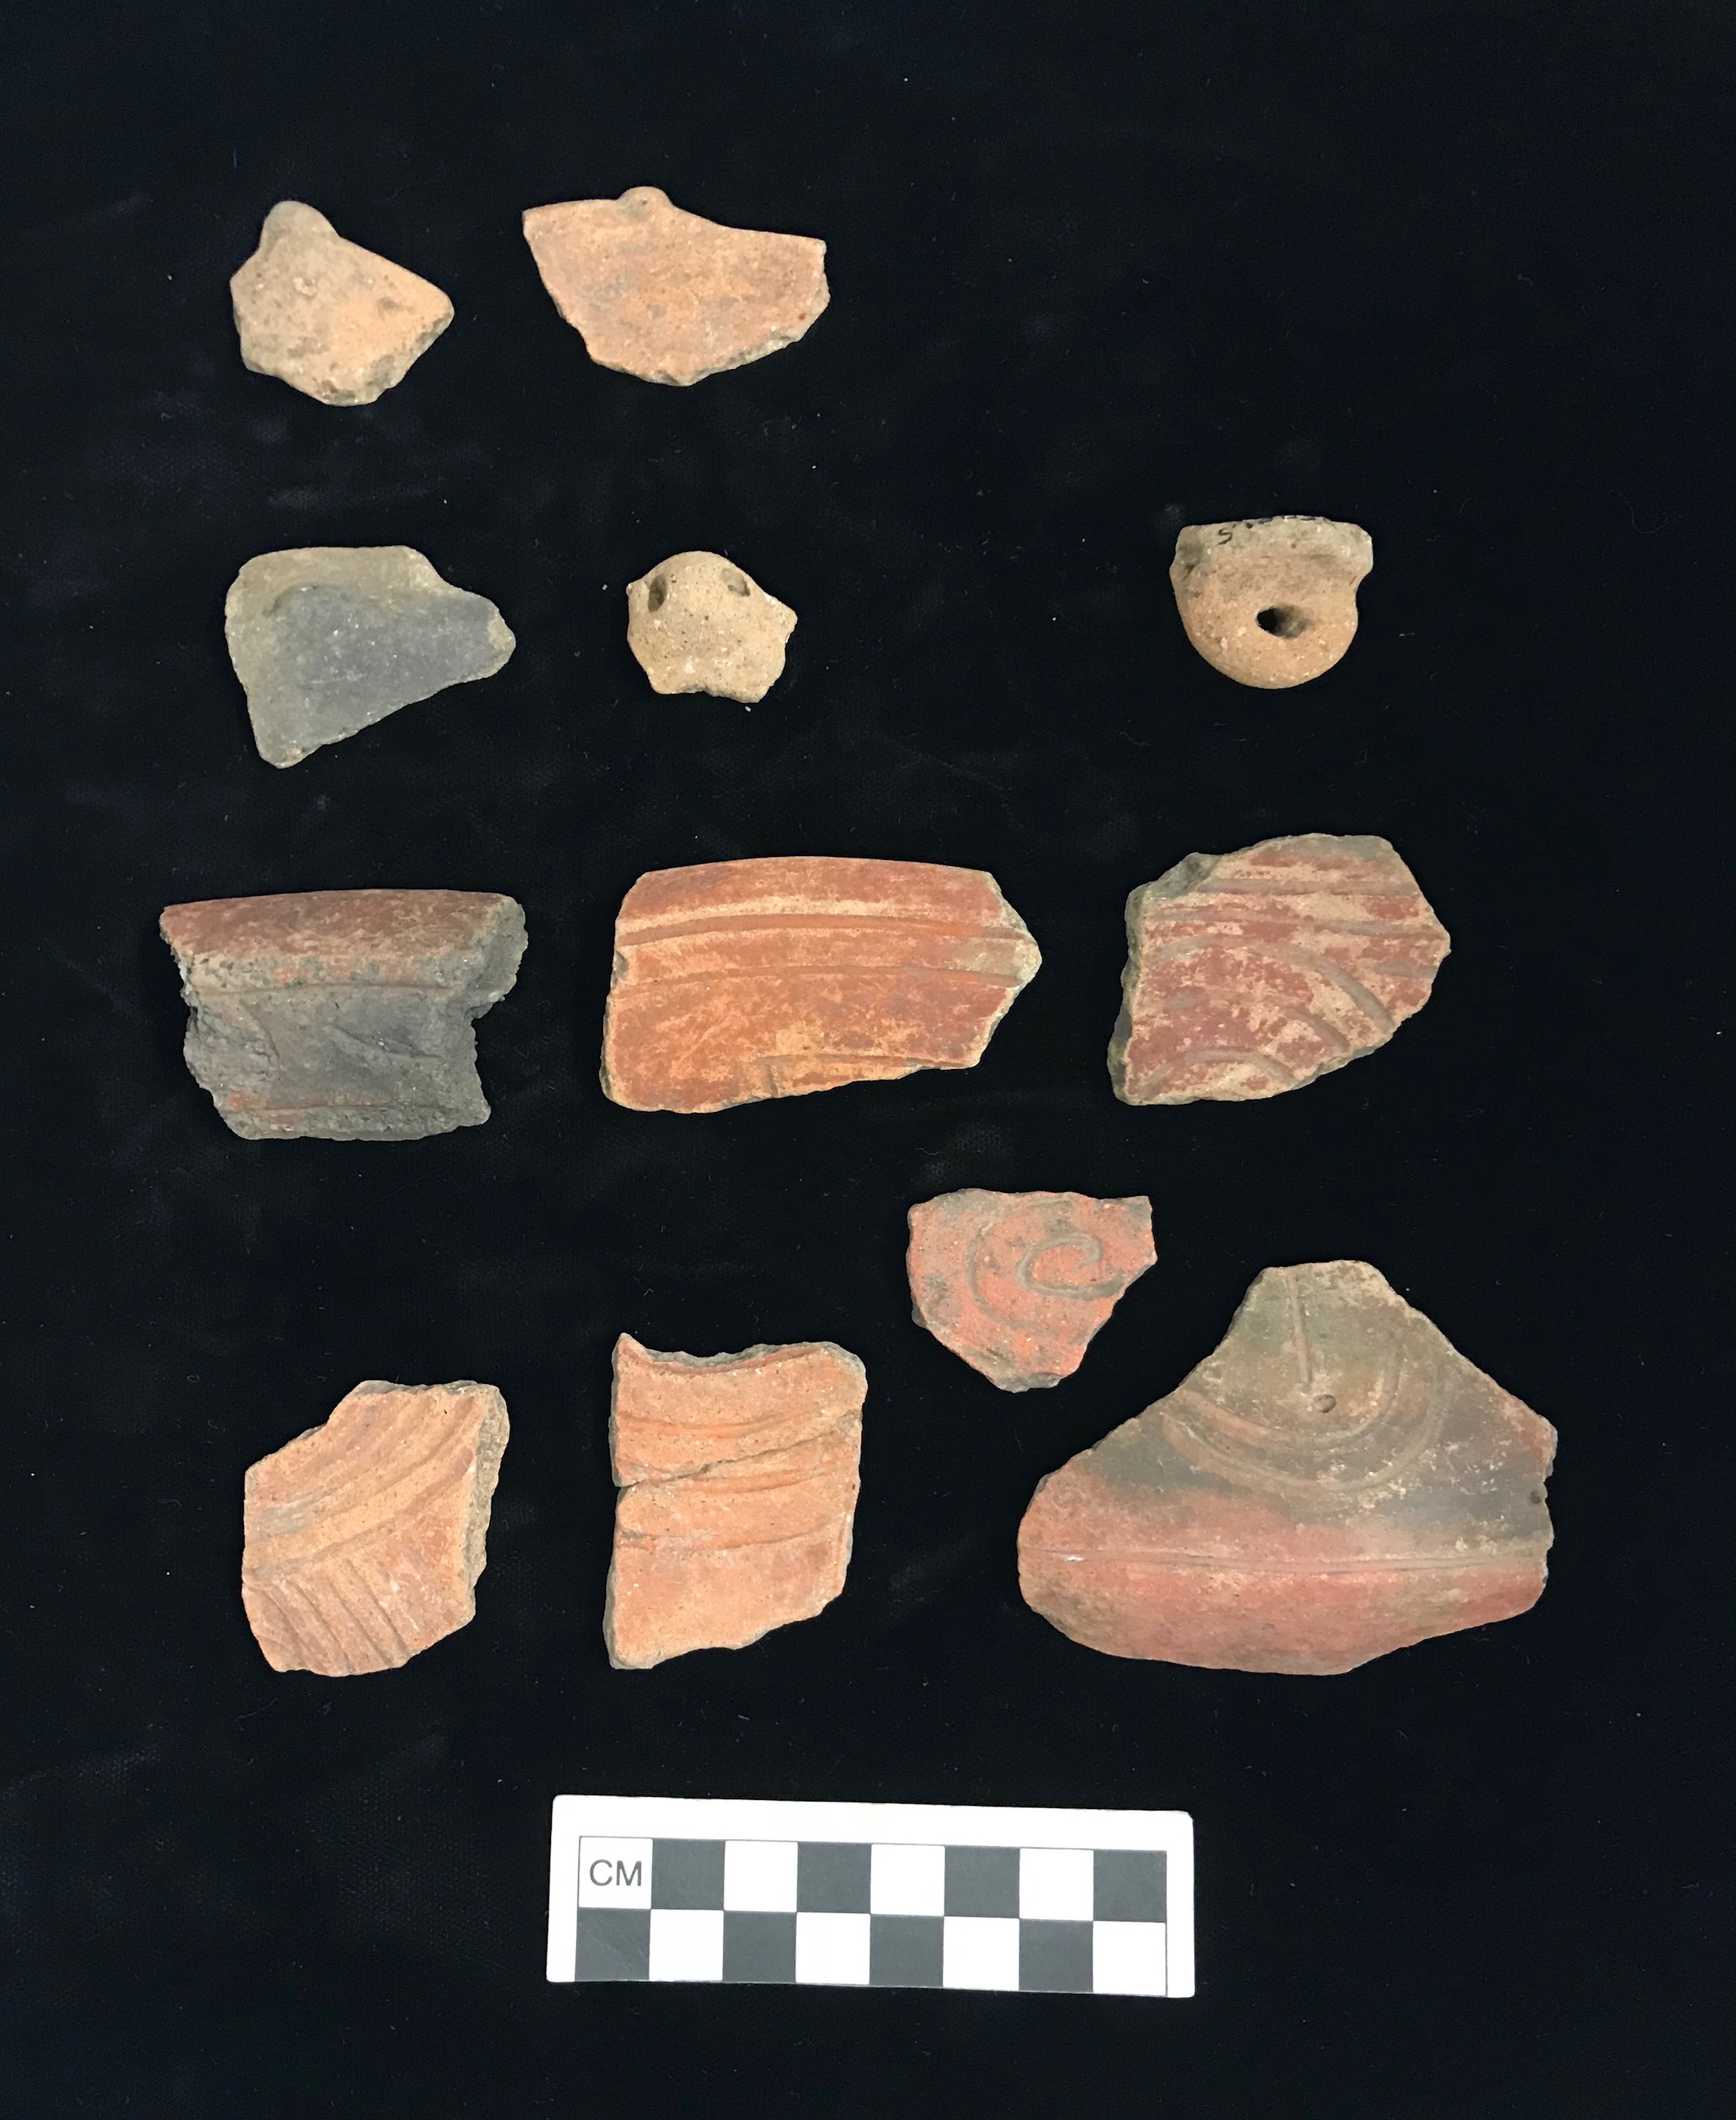 Plate VIII. PEARLS SIDE LUGGED, SIMON FLANGED AND BROAD LINE INCISED SHERDS. FLMNH Acc. Nos. 98004, 97990, 97991, 97992, 97994, 97995, 97996.